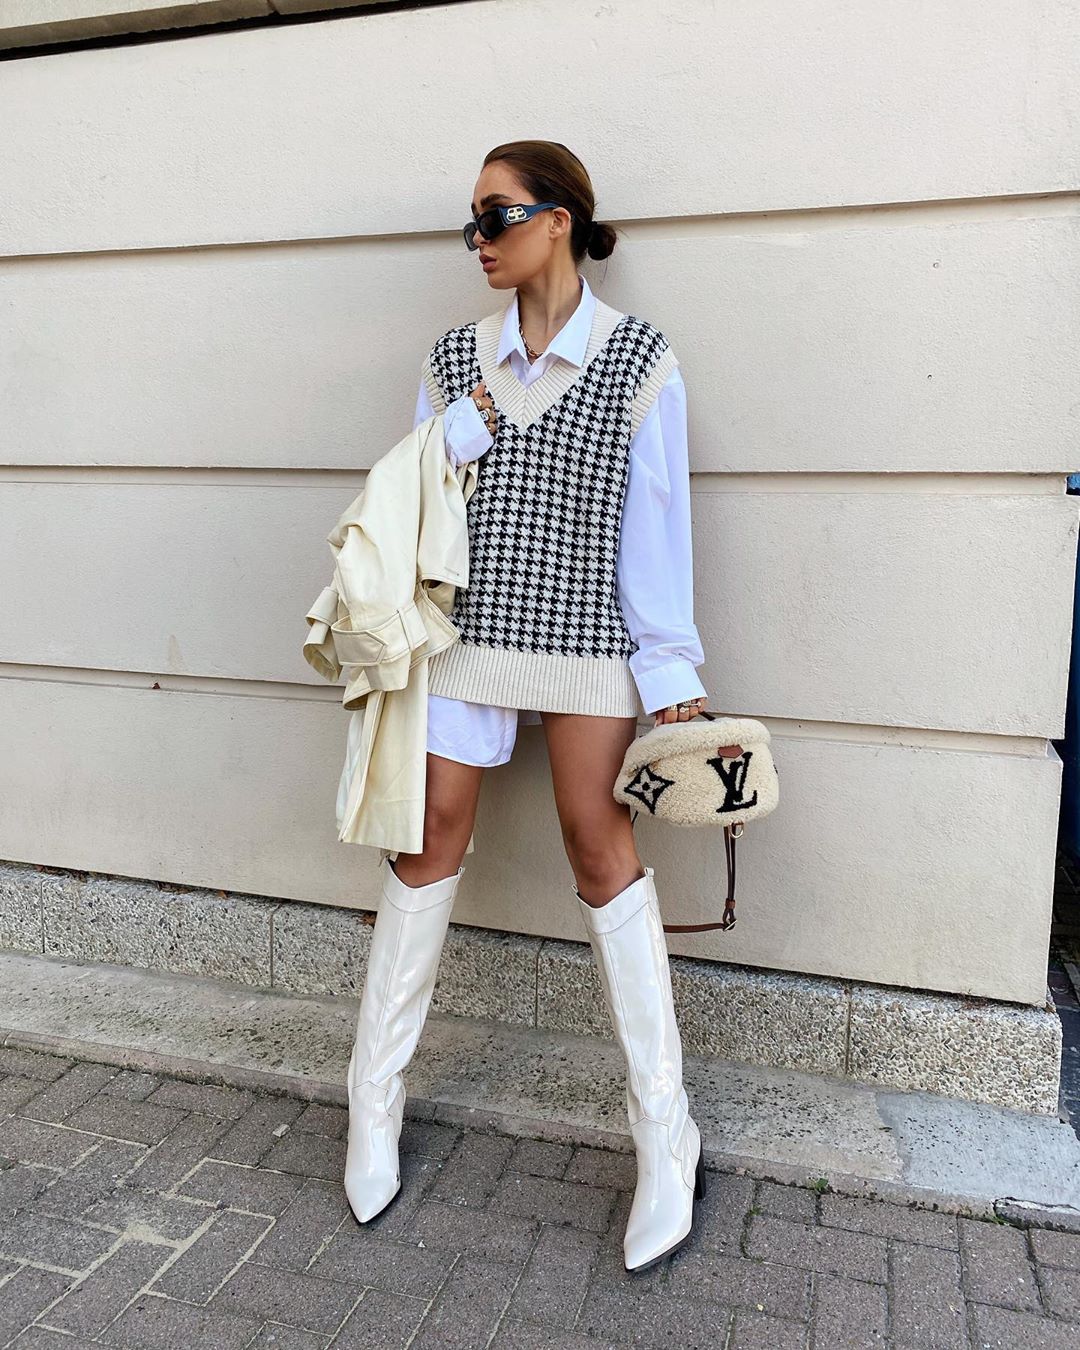 20 Pairs of White Boots To Buy for Fall and Beyond